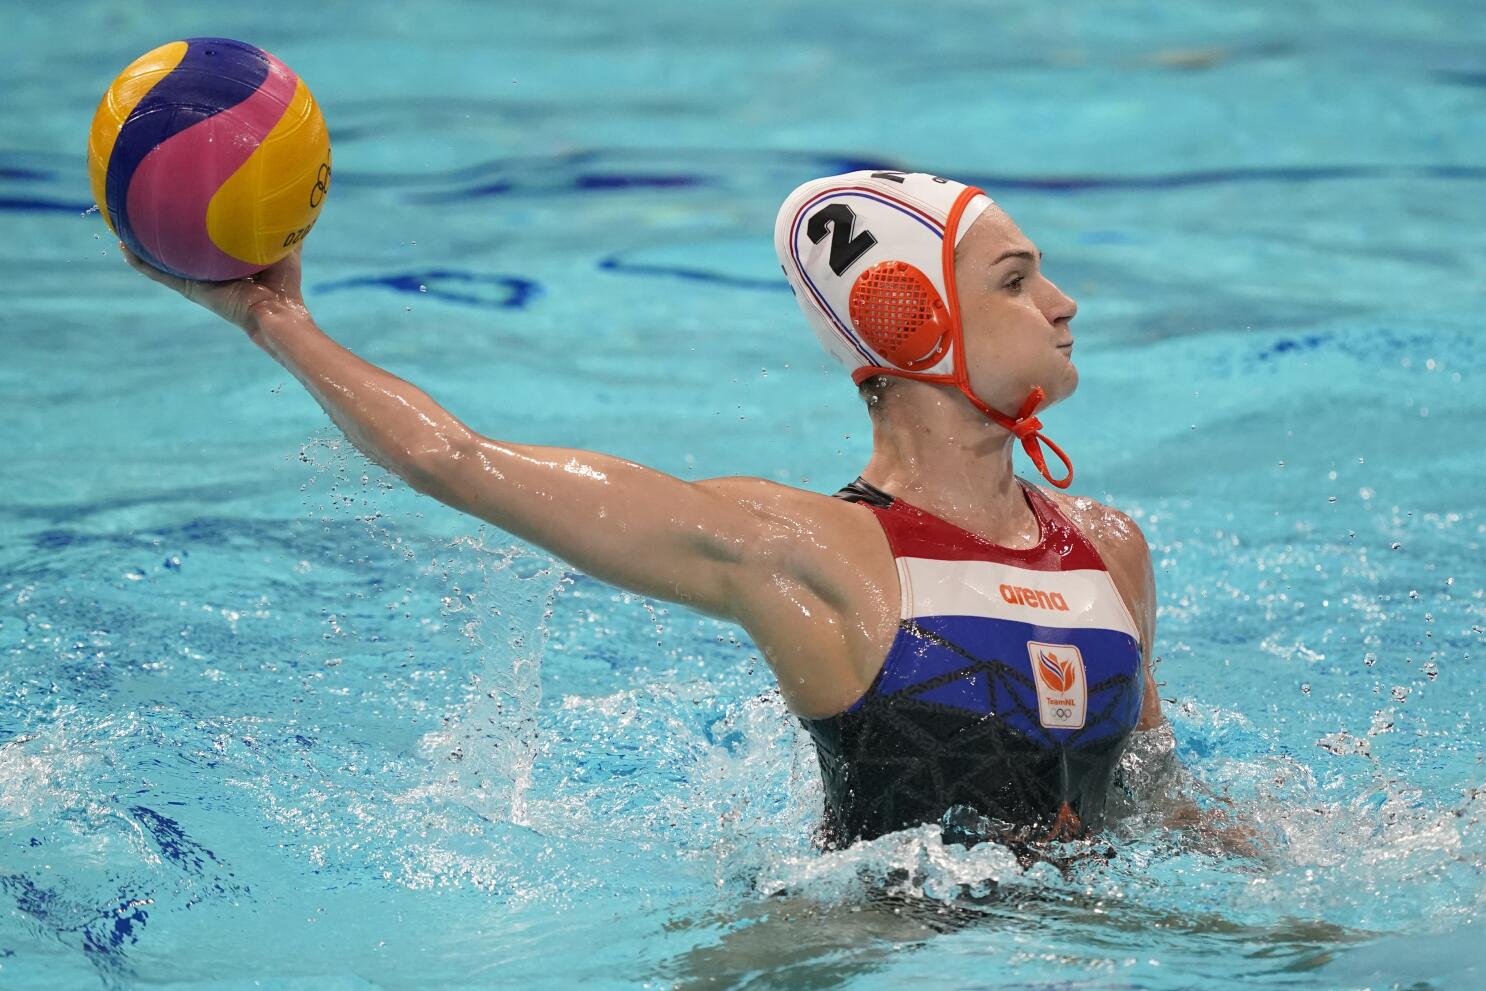 Greek know-how leads China to the first water polo title in 12